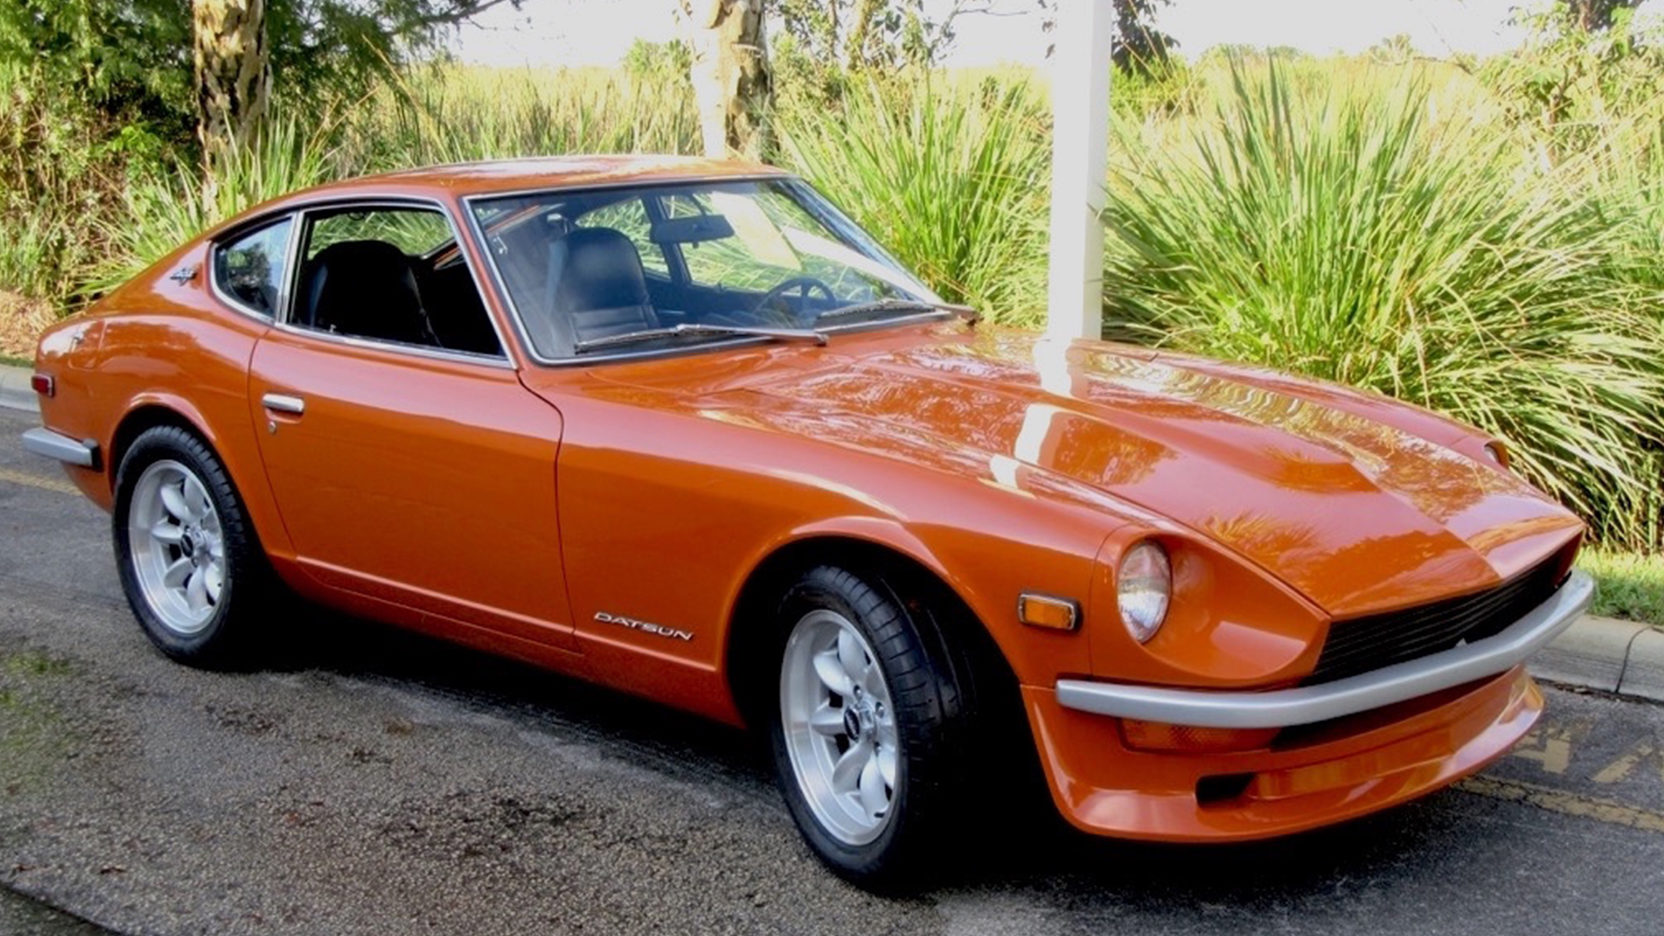 Red 1970 Datsun 240Z parked by side of road